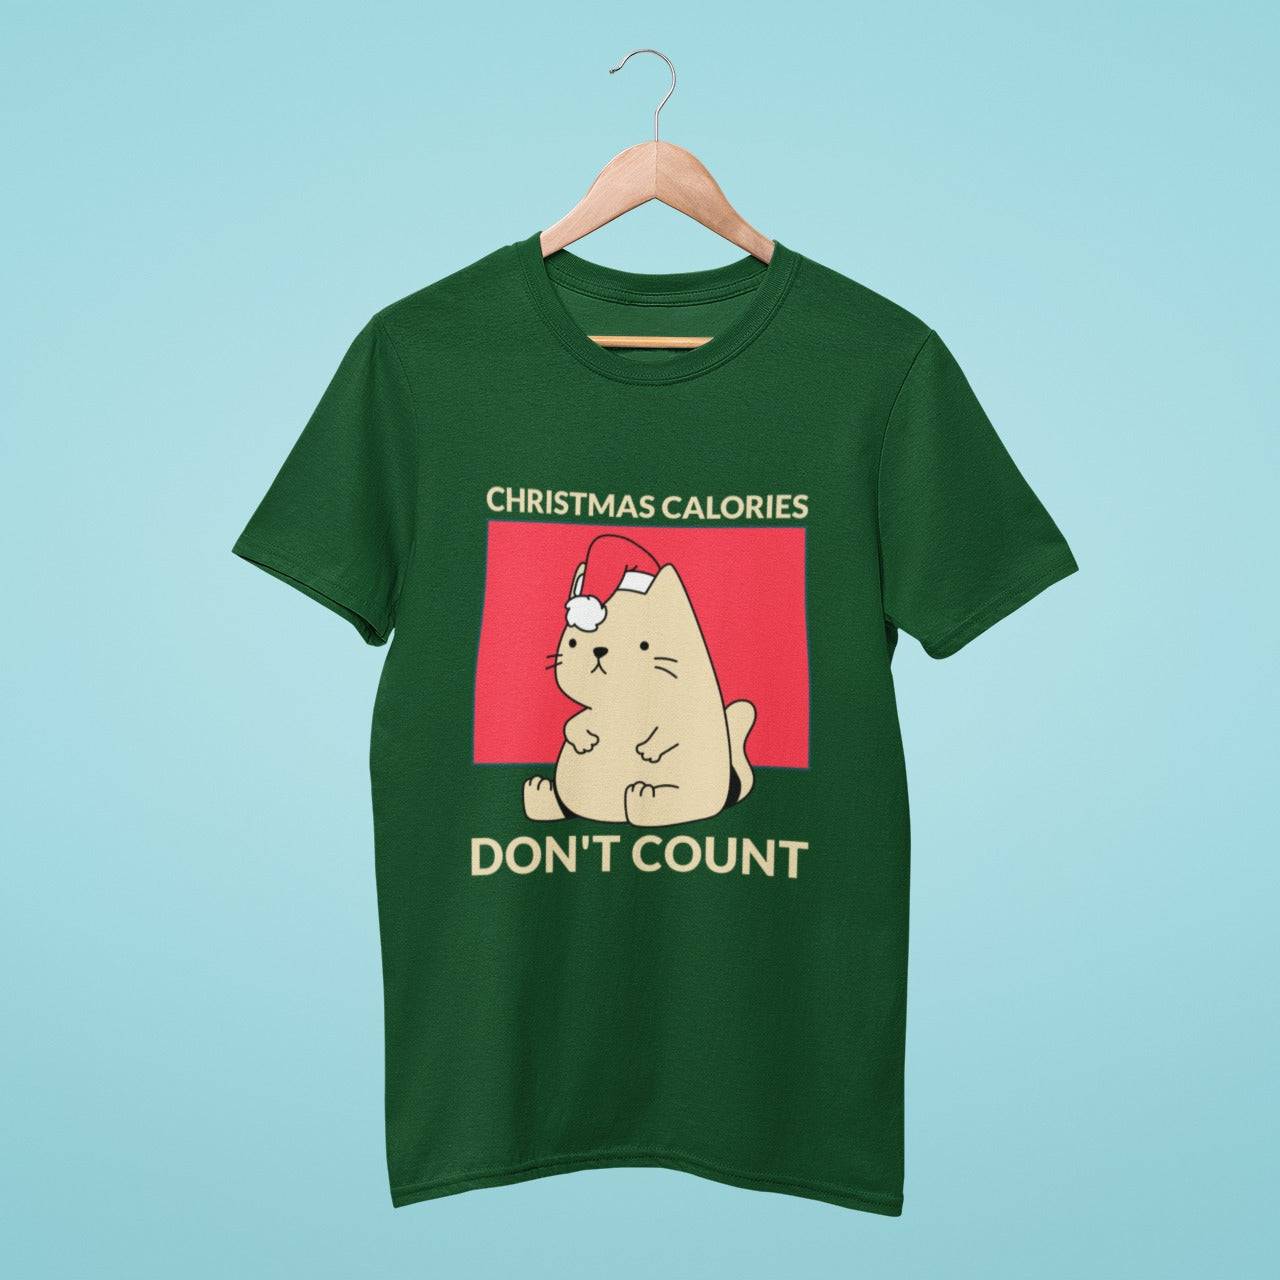 Celebrate the holidays in style with our green t-shirt featuring a cute and chubby cat wearing a Christmas hat and the fun slogan "Christmas calories don't count". Made from high-quality materials, this comfortable and durable shirt is perfect for festive events and gatherings. Don't miss out on adding this must-have holiday tee to your wardrobe!